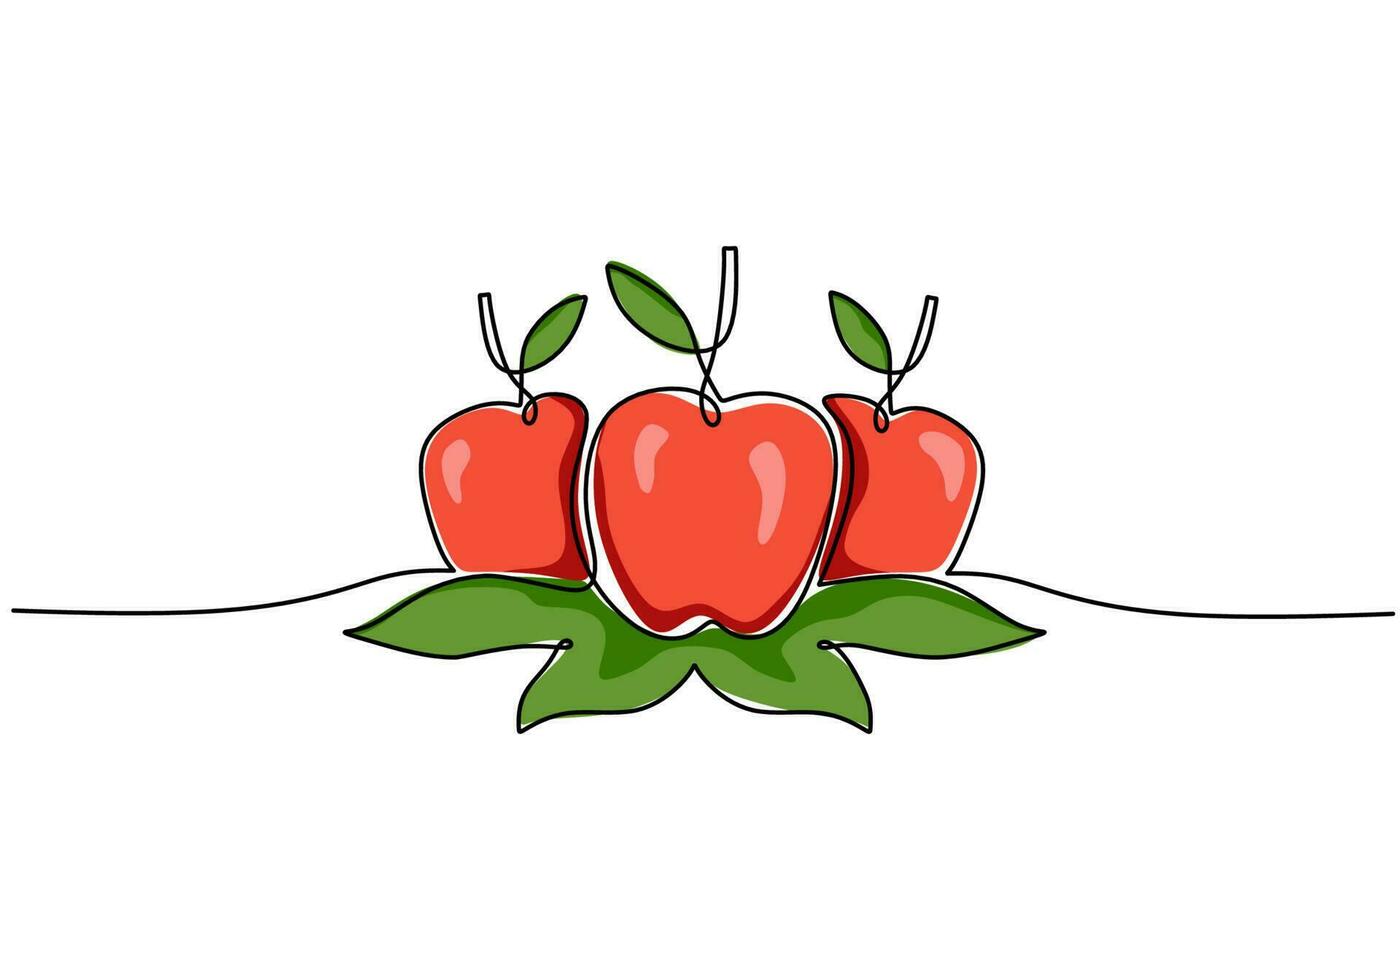 Apple continuous one line drawing, fruit vector illustration.